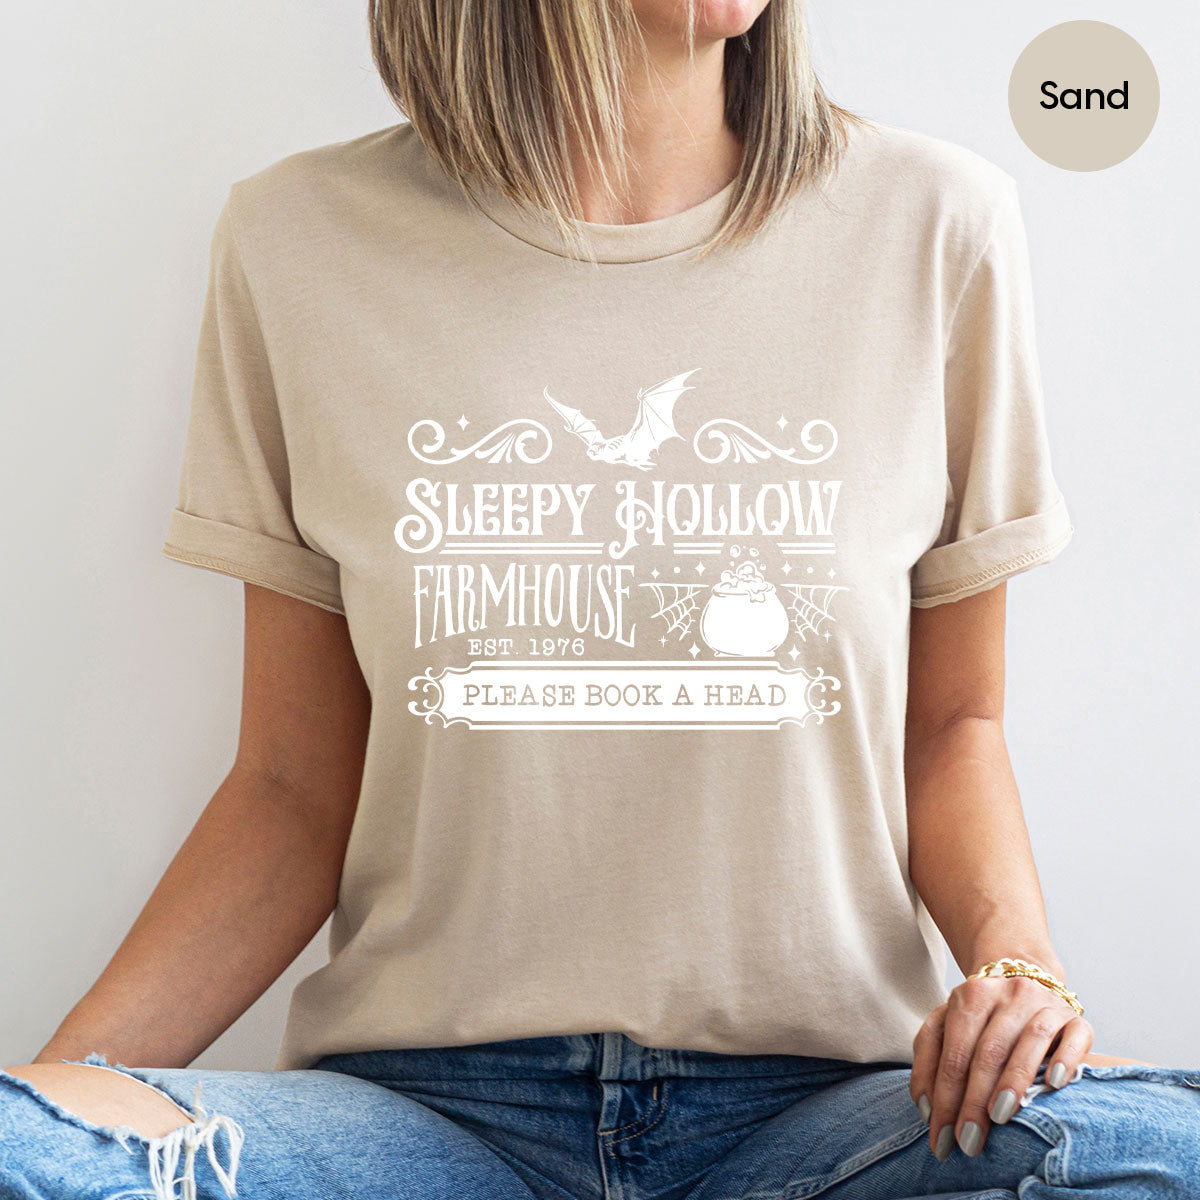 Spooky Season Clothing, Halloween Party Shirts, Farm Horror Outfit, Farmer Crewneck Sweatshirt, Witchy Gifts for Her, Witch Graphic Tees